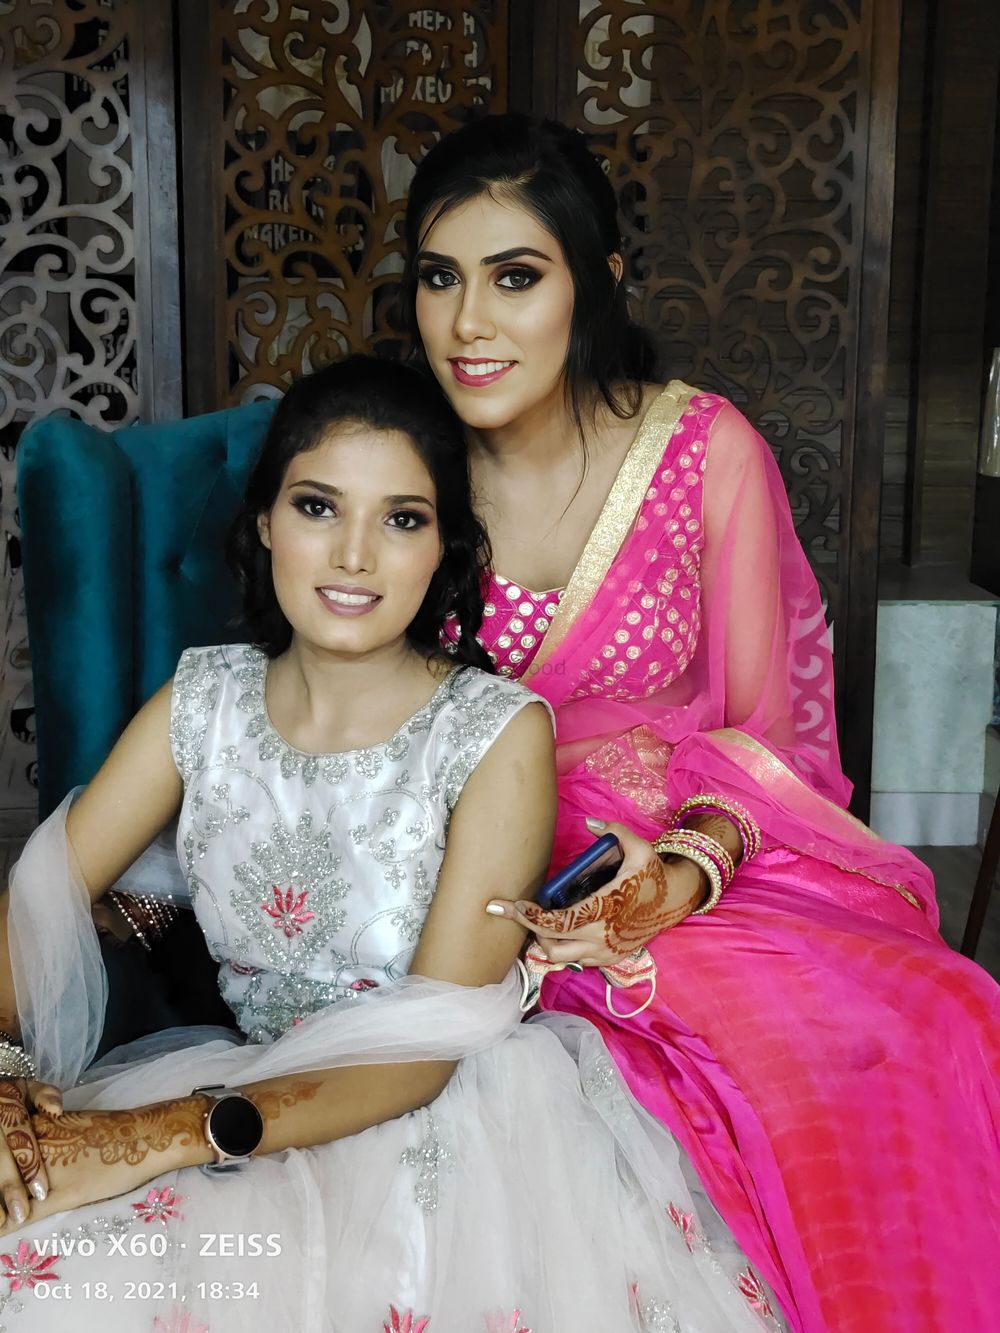 Photo From Hd Party Makeups - By Heena Batra Makeovers